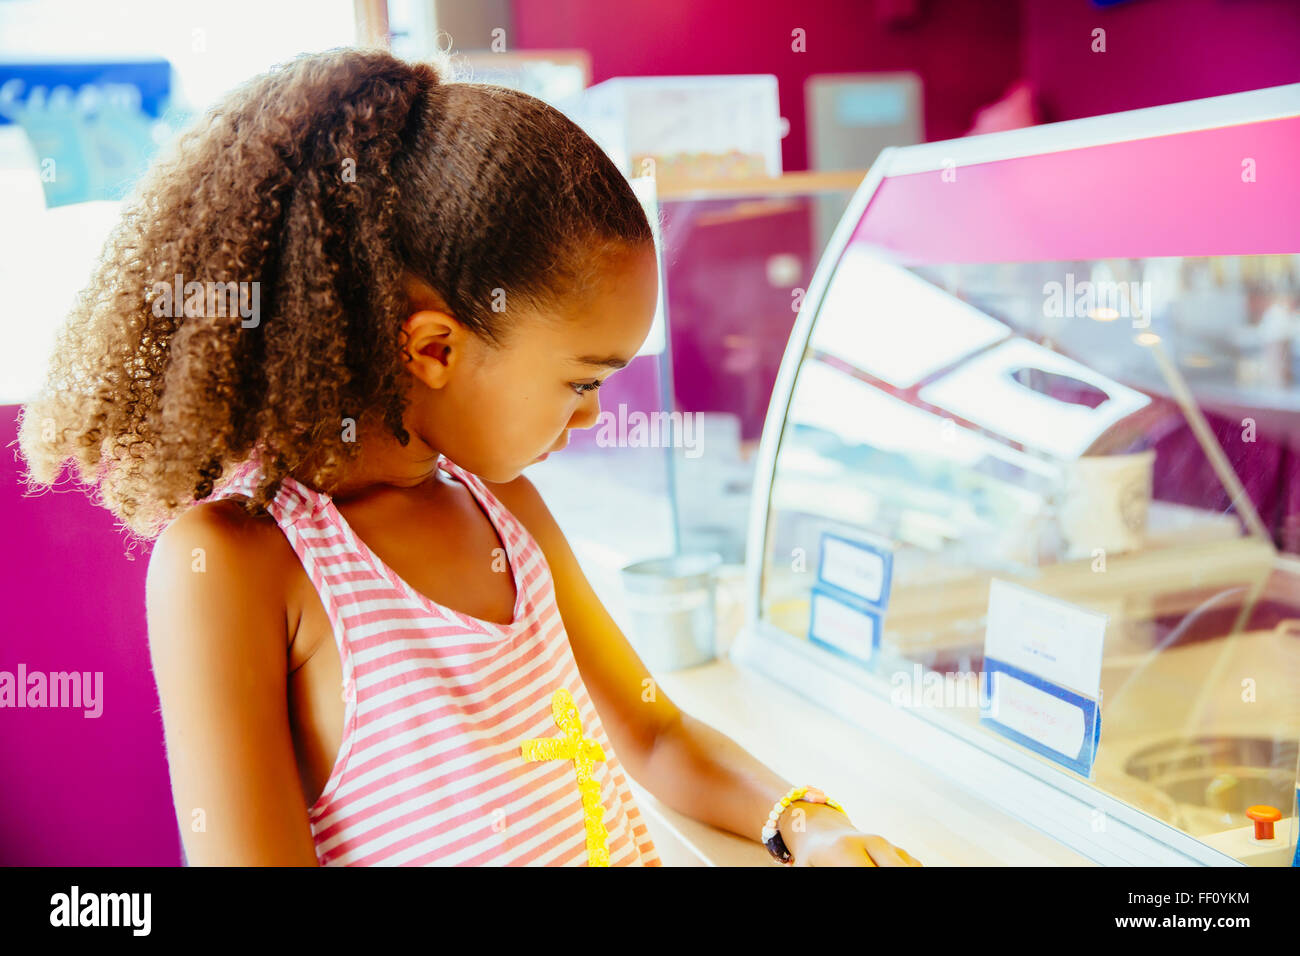 Mixed Race girl in ice cream shop Banque D'Images